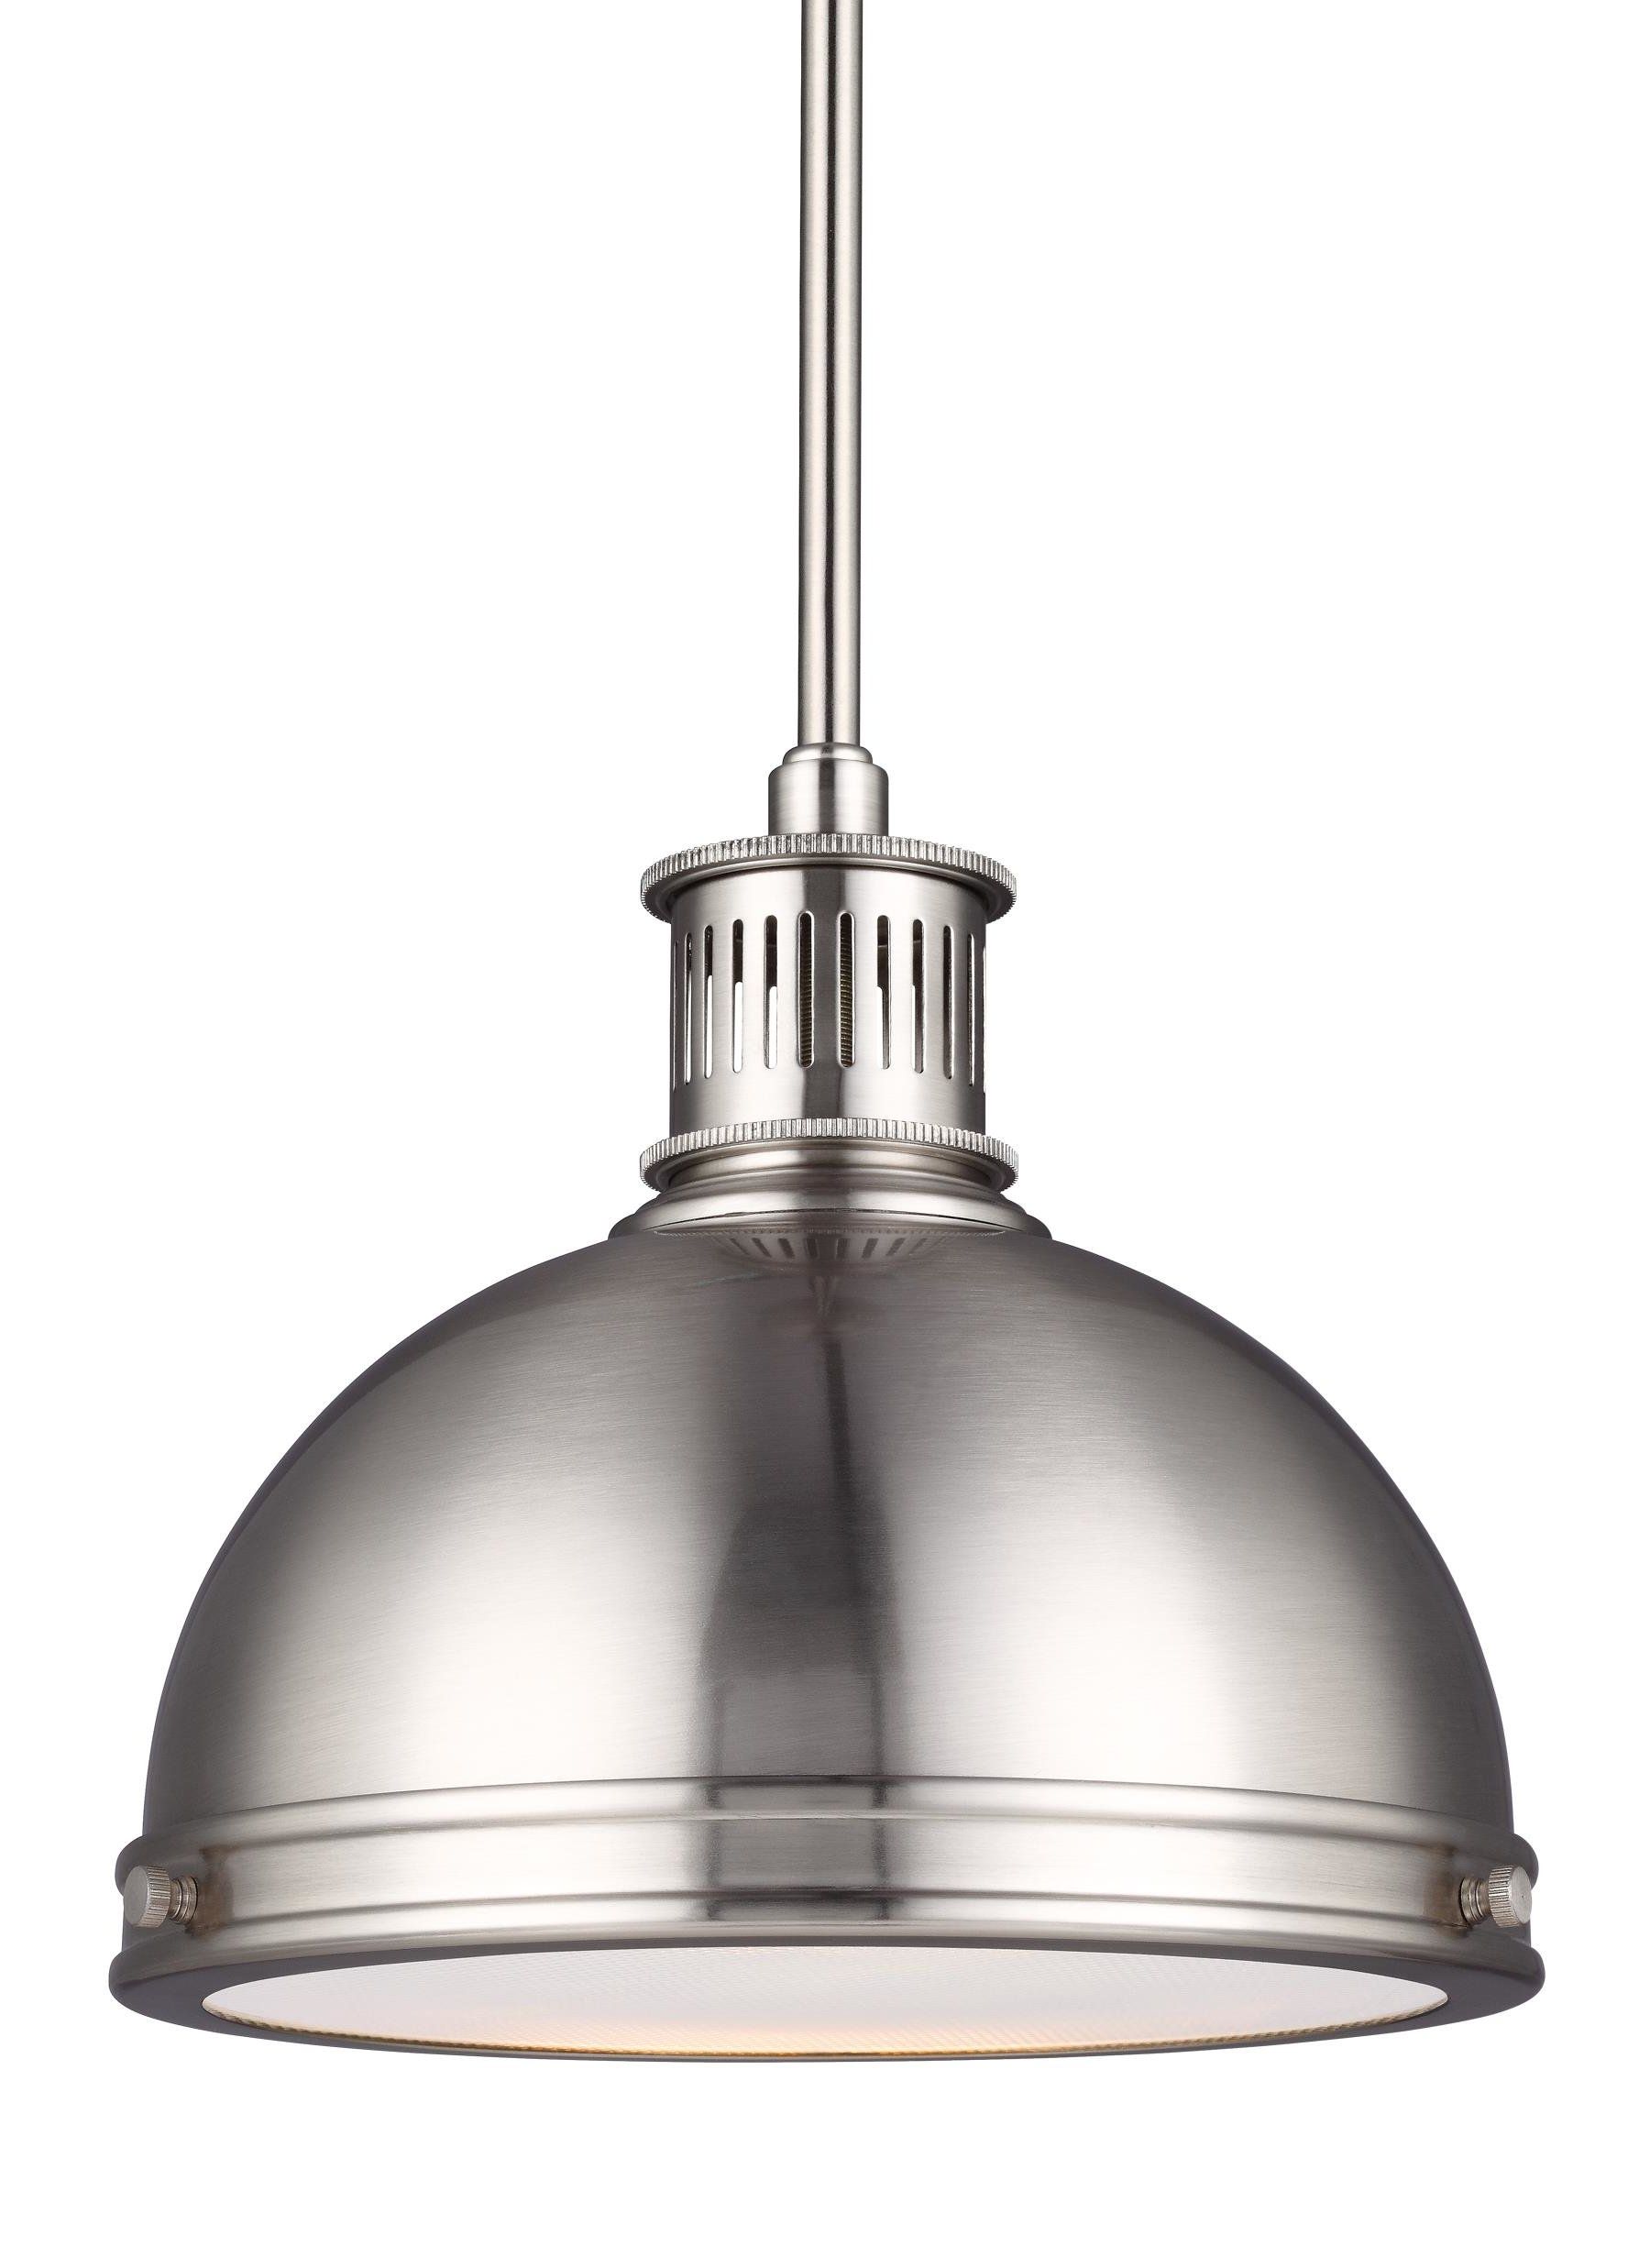 Fashionable Orchard Hill 1 Light Led Dome Pendant Pertaining To Amara 3 Light Dome Pendants (View 17 of 20)